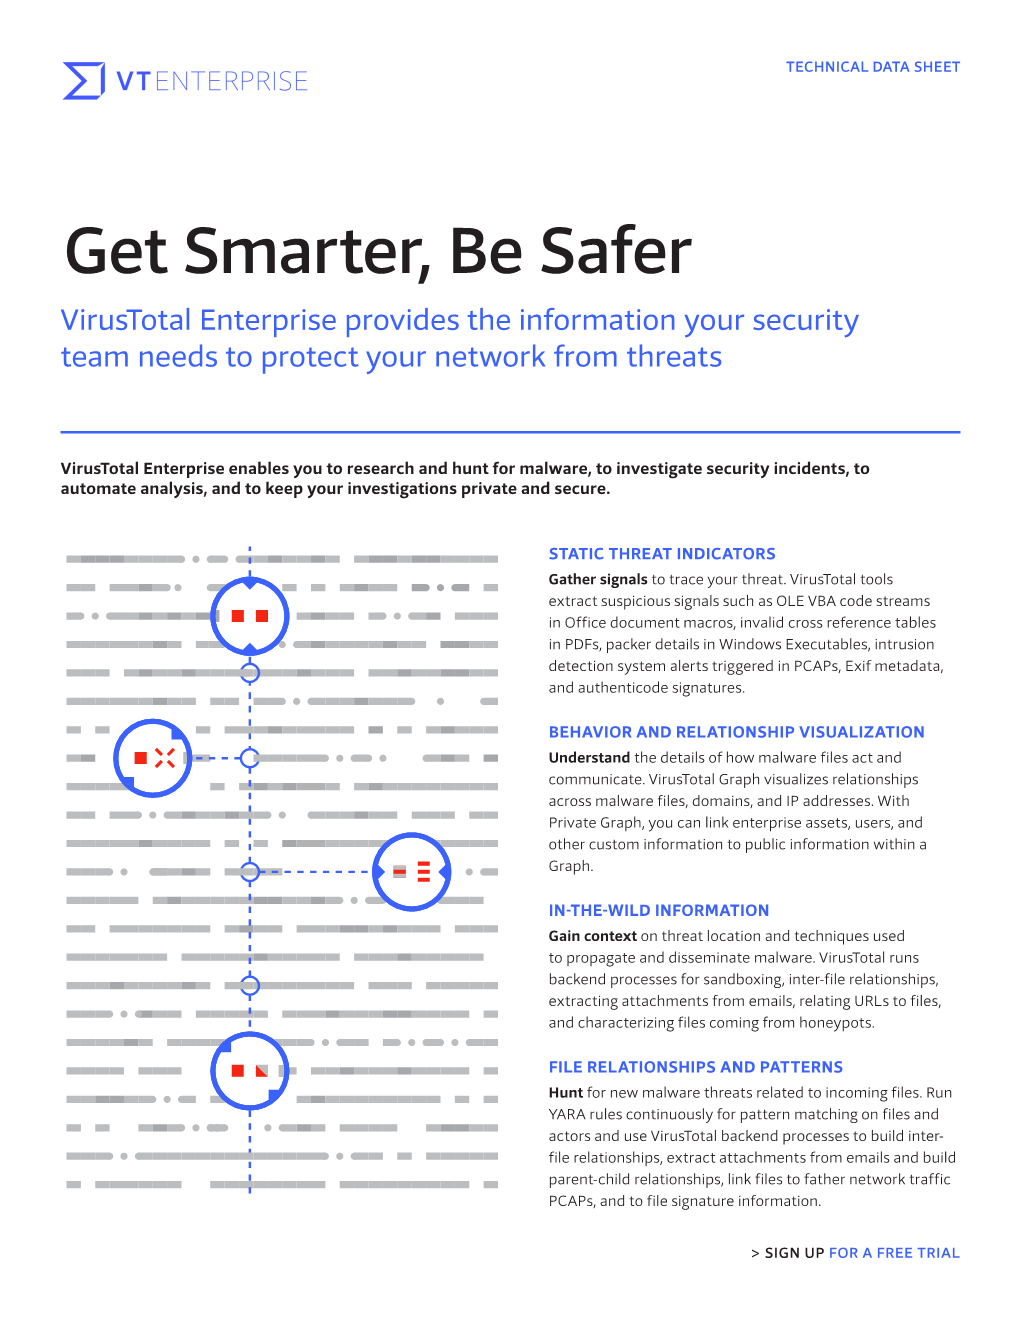 Get Smarter, Be Safer Virustotal Enterprise Provides the Information Your Security Team Needs to Protect Your Network from Threats